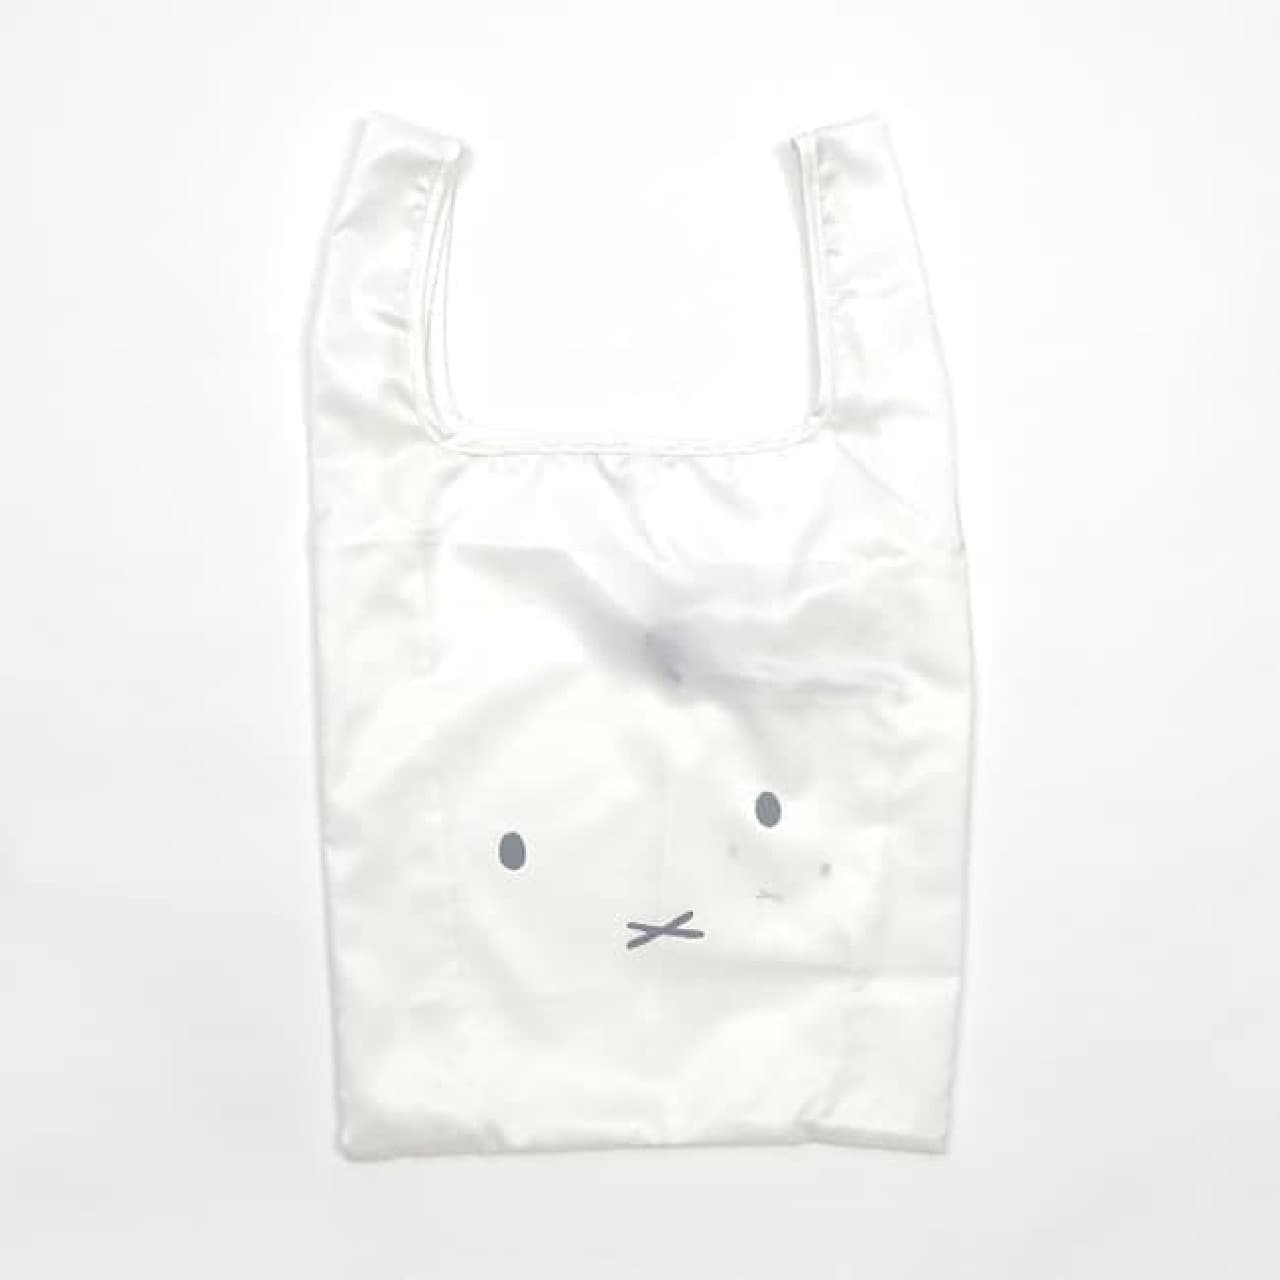 Convenient 3 sizes! Miffy-patterned eco-bag for Villevan--for shopping and lunch boxes